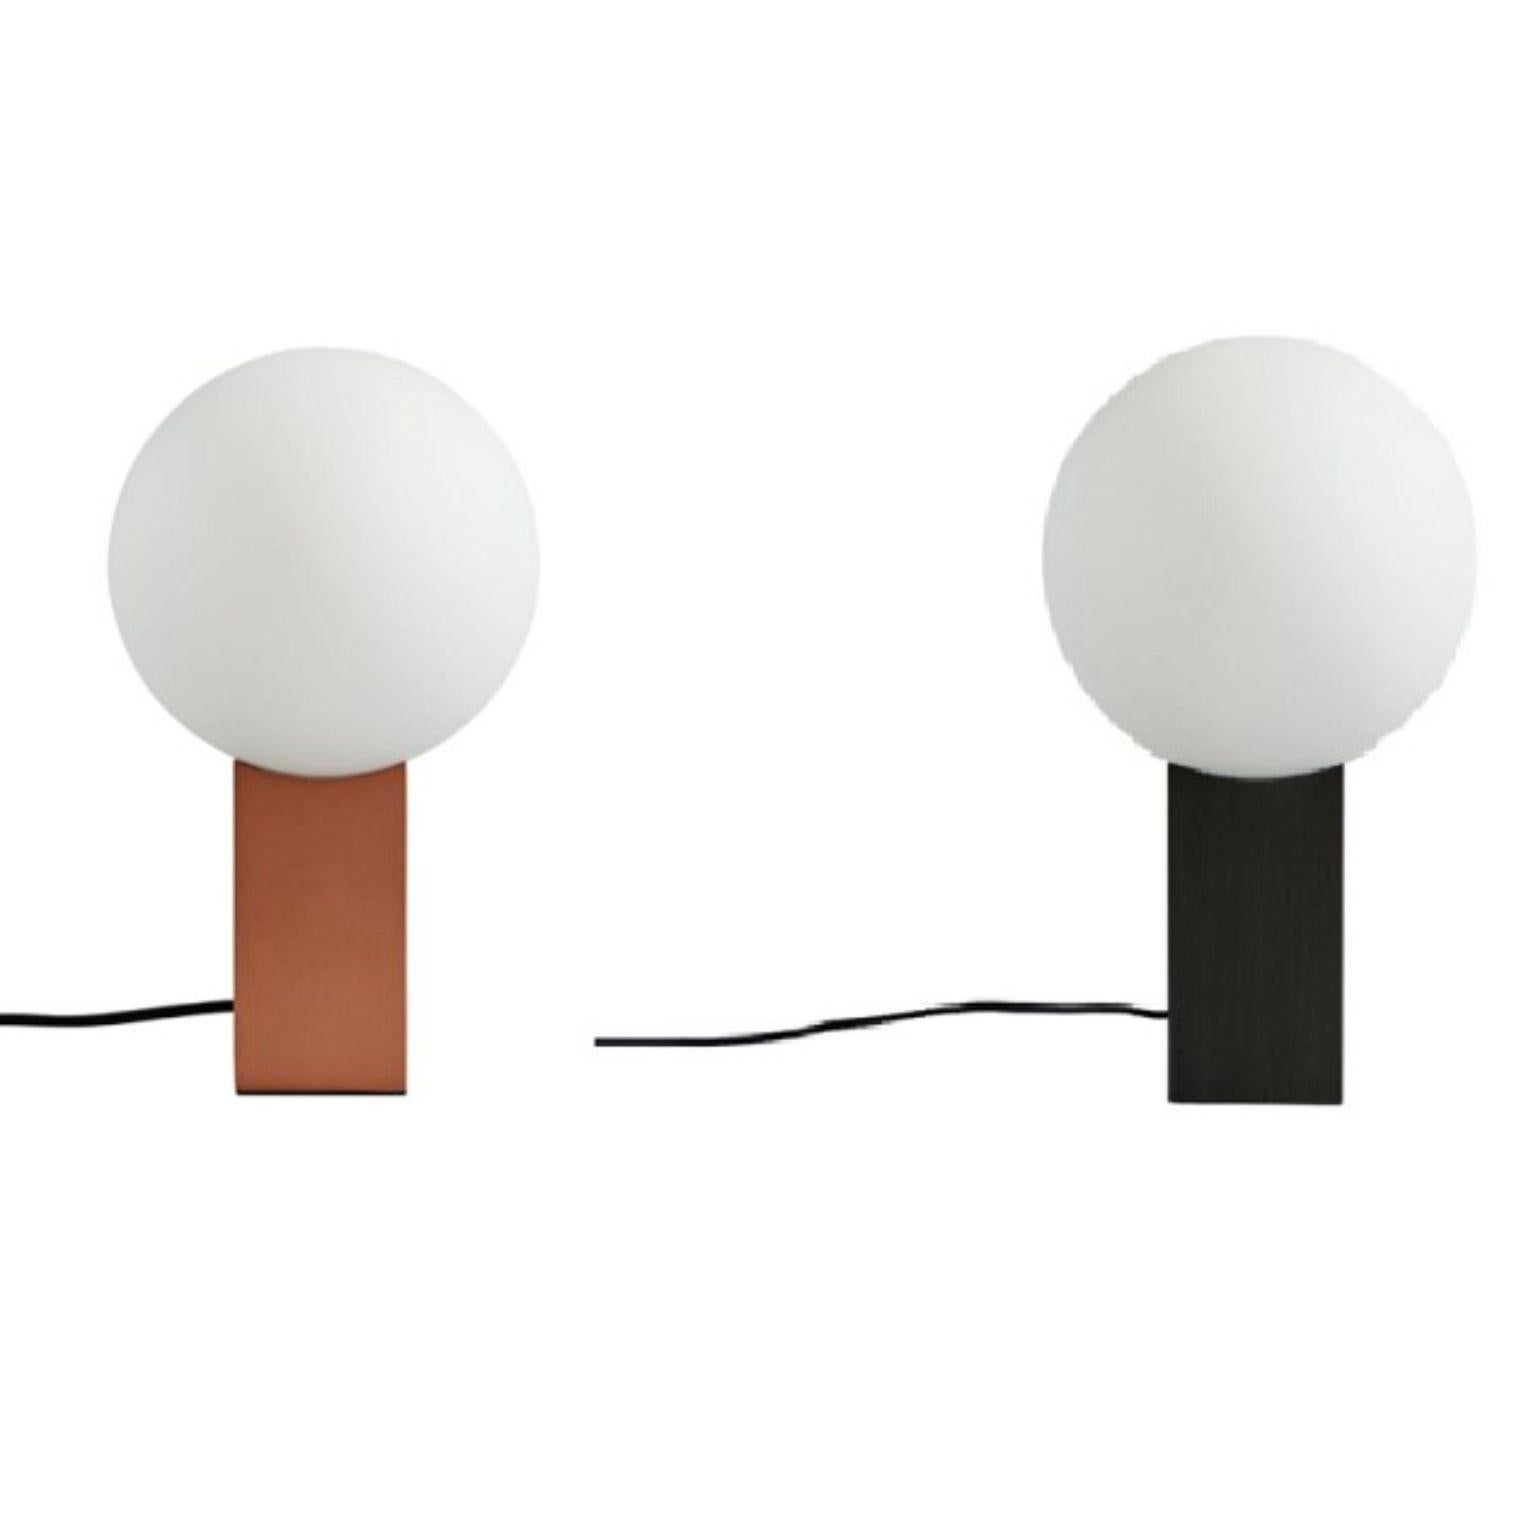 Set of 2 Hoop table lamps by 101 Copenhagen
Designed by Nicolaj Nøddesbo & Tommy Hyldahl
Dimensions: L 20 x W 20 x H 34 cm
Cable length: 200 cm
This product is not wired for USA
Materials: metal: plated metal / bronze.
Opal glass / white.
Cable: